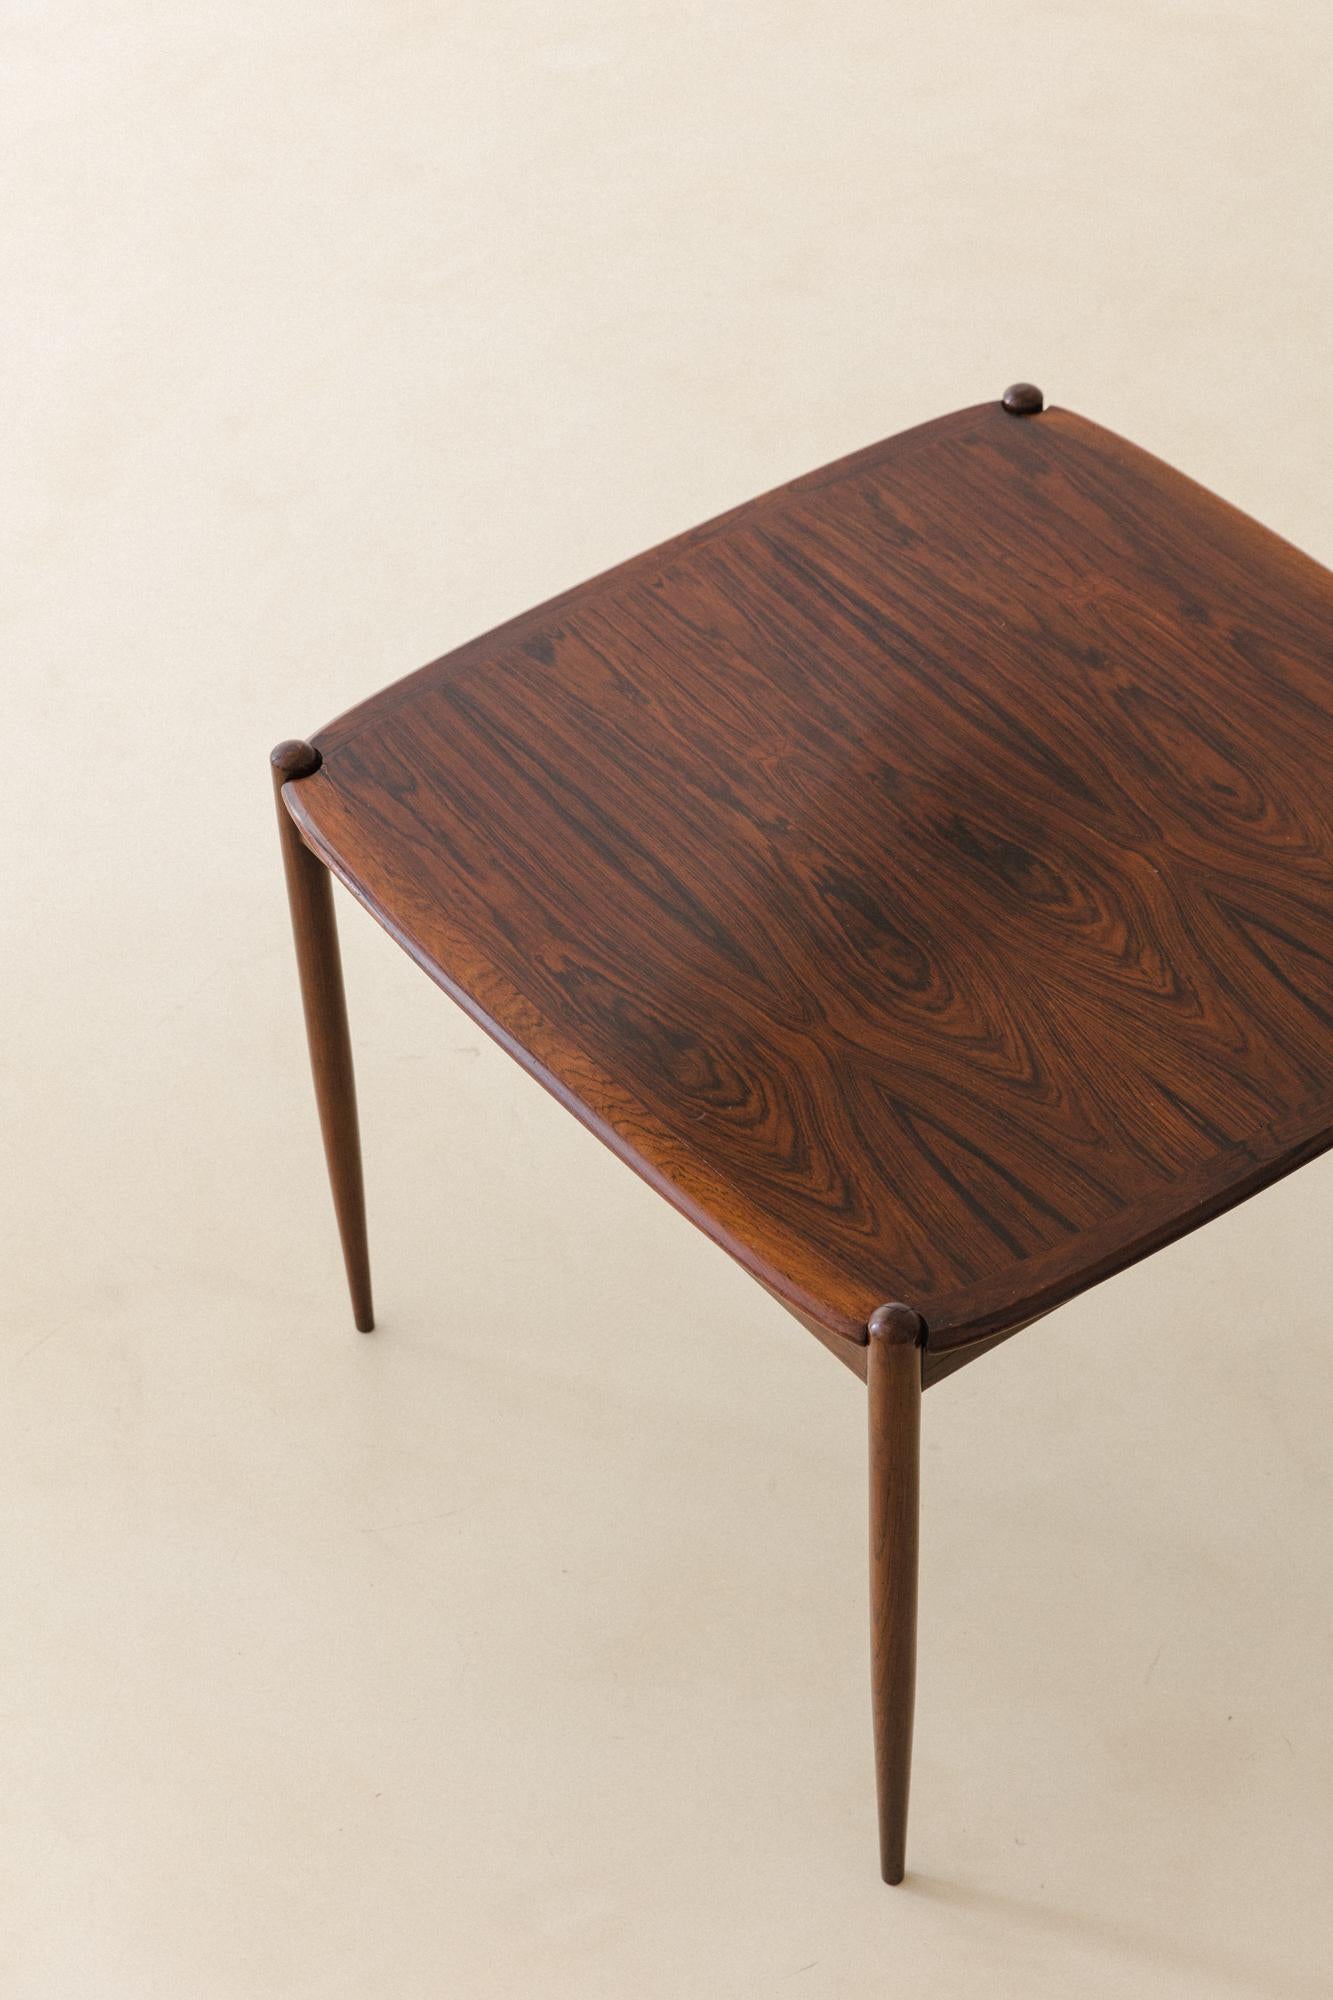 Turned Forma S.A. Game Table in Rosewood by Carlo Hauner and Martin Eisler, c. 1955 For Sale